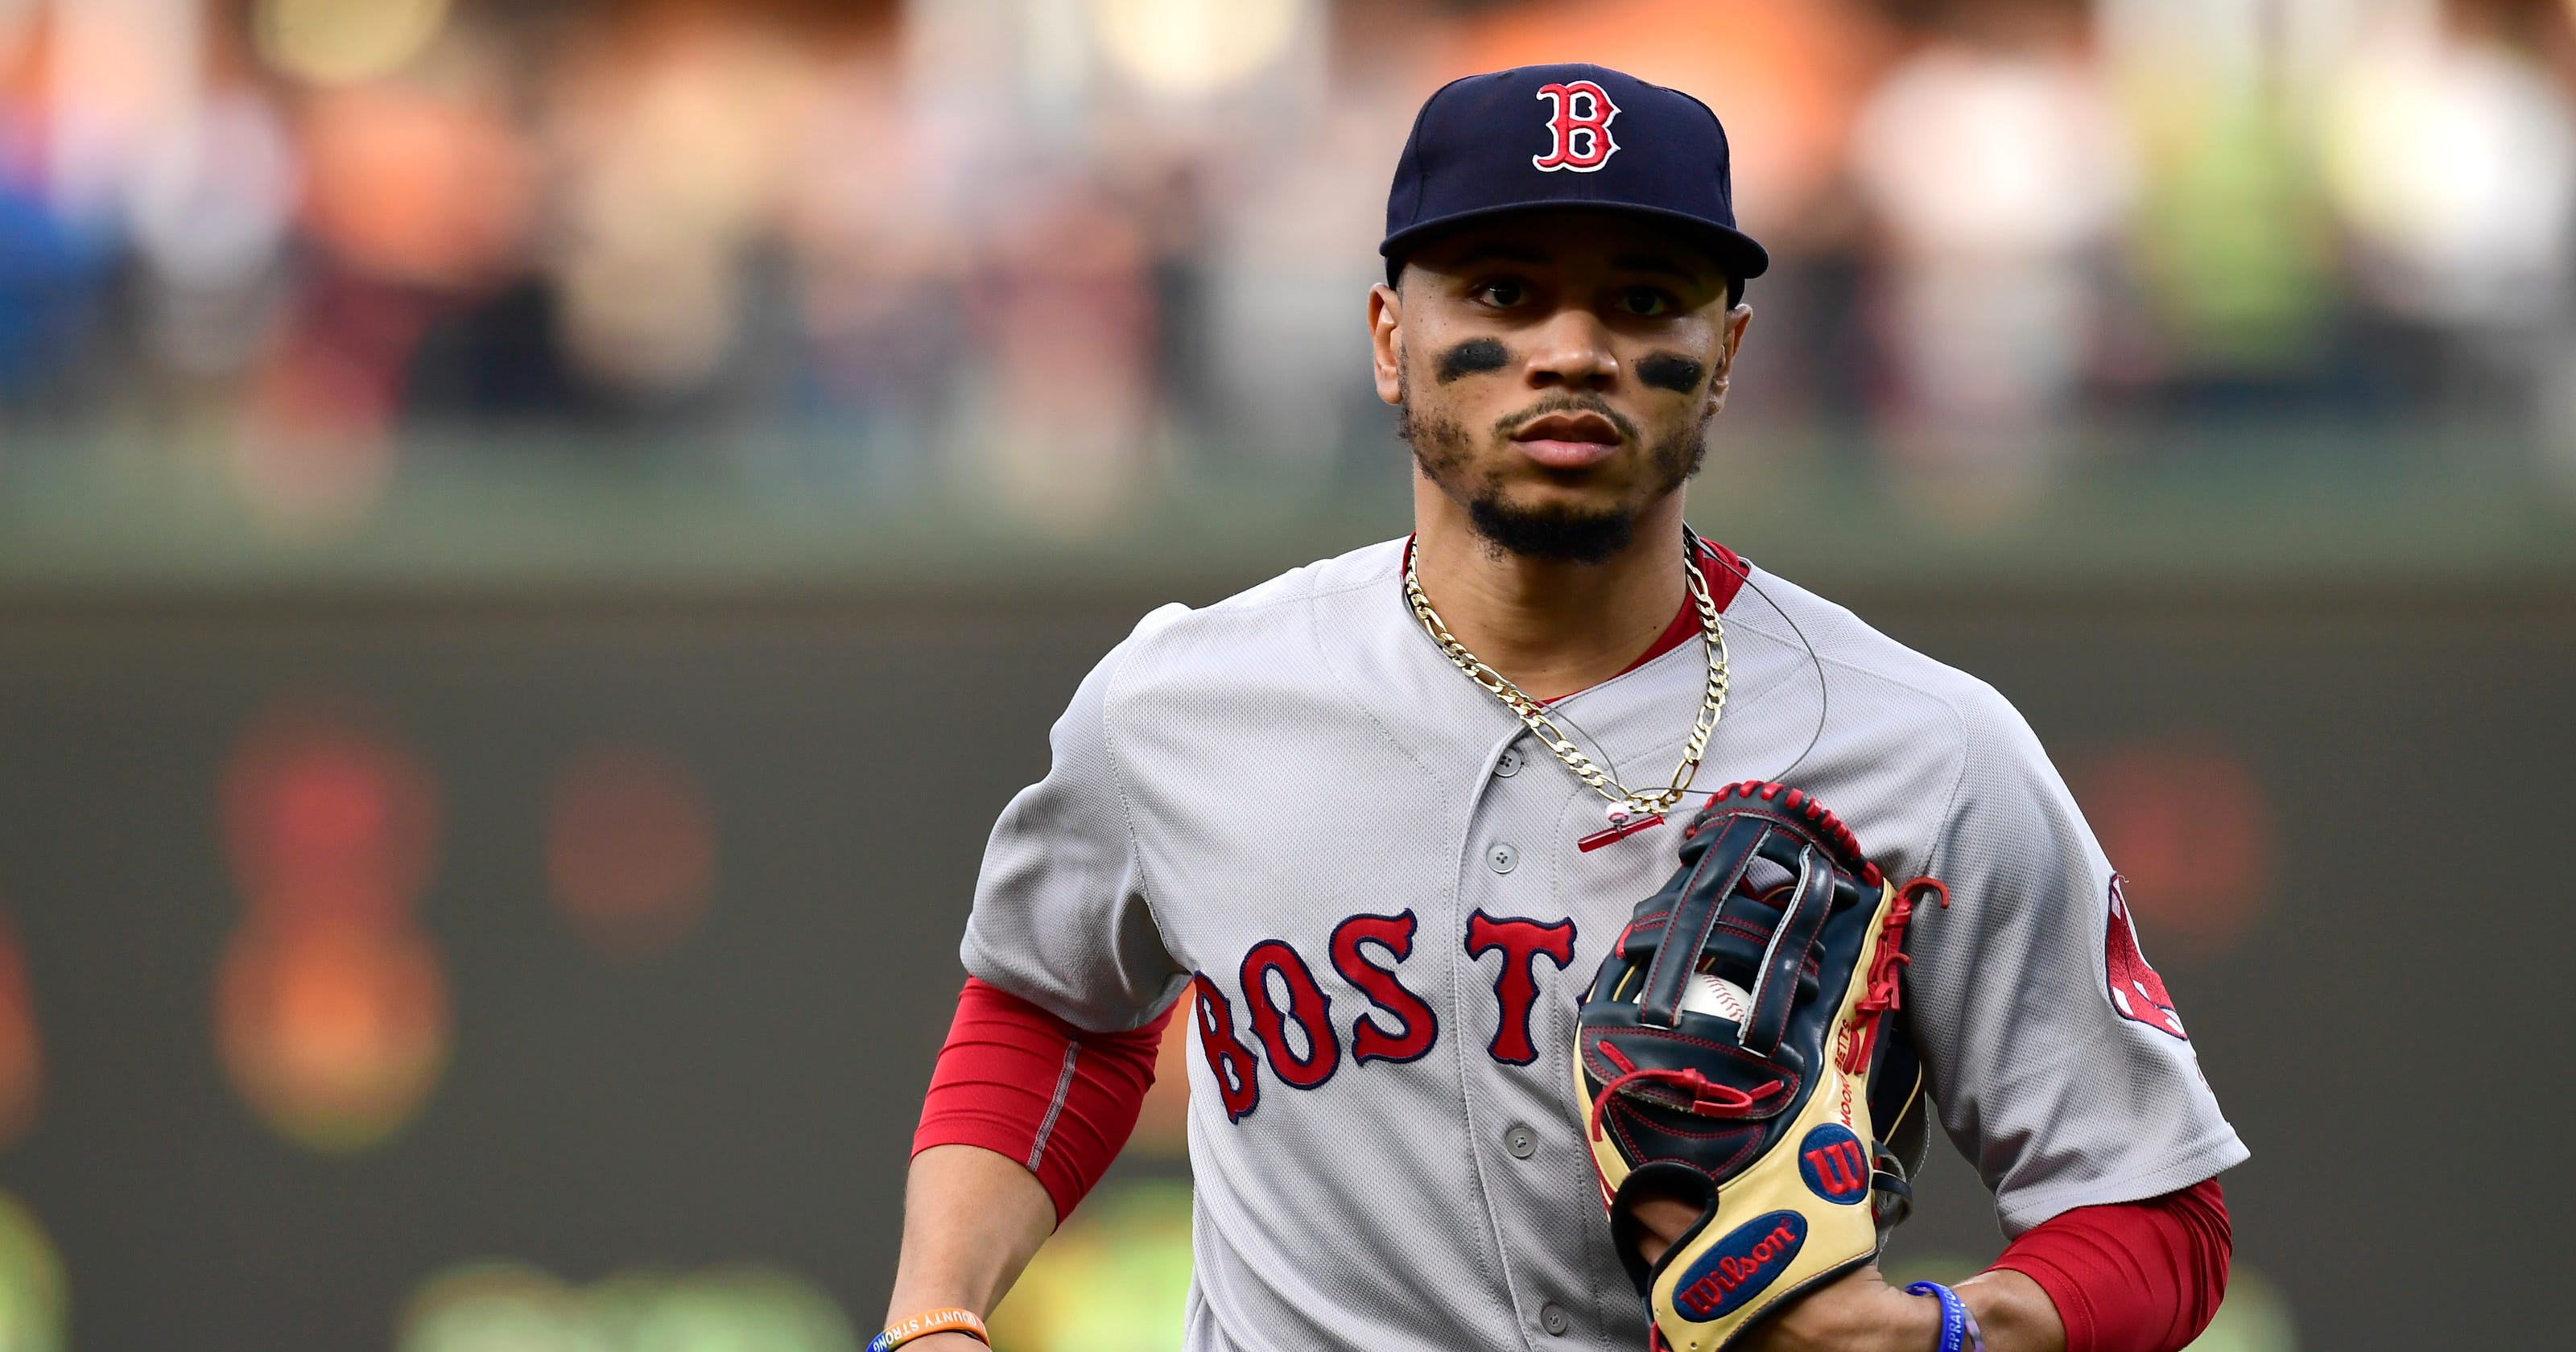 All-Star Game: Mookie Betts is the top vote-getter in the AL3200 x 1680